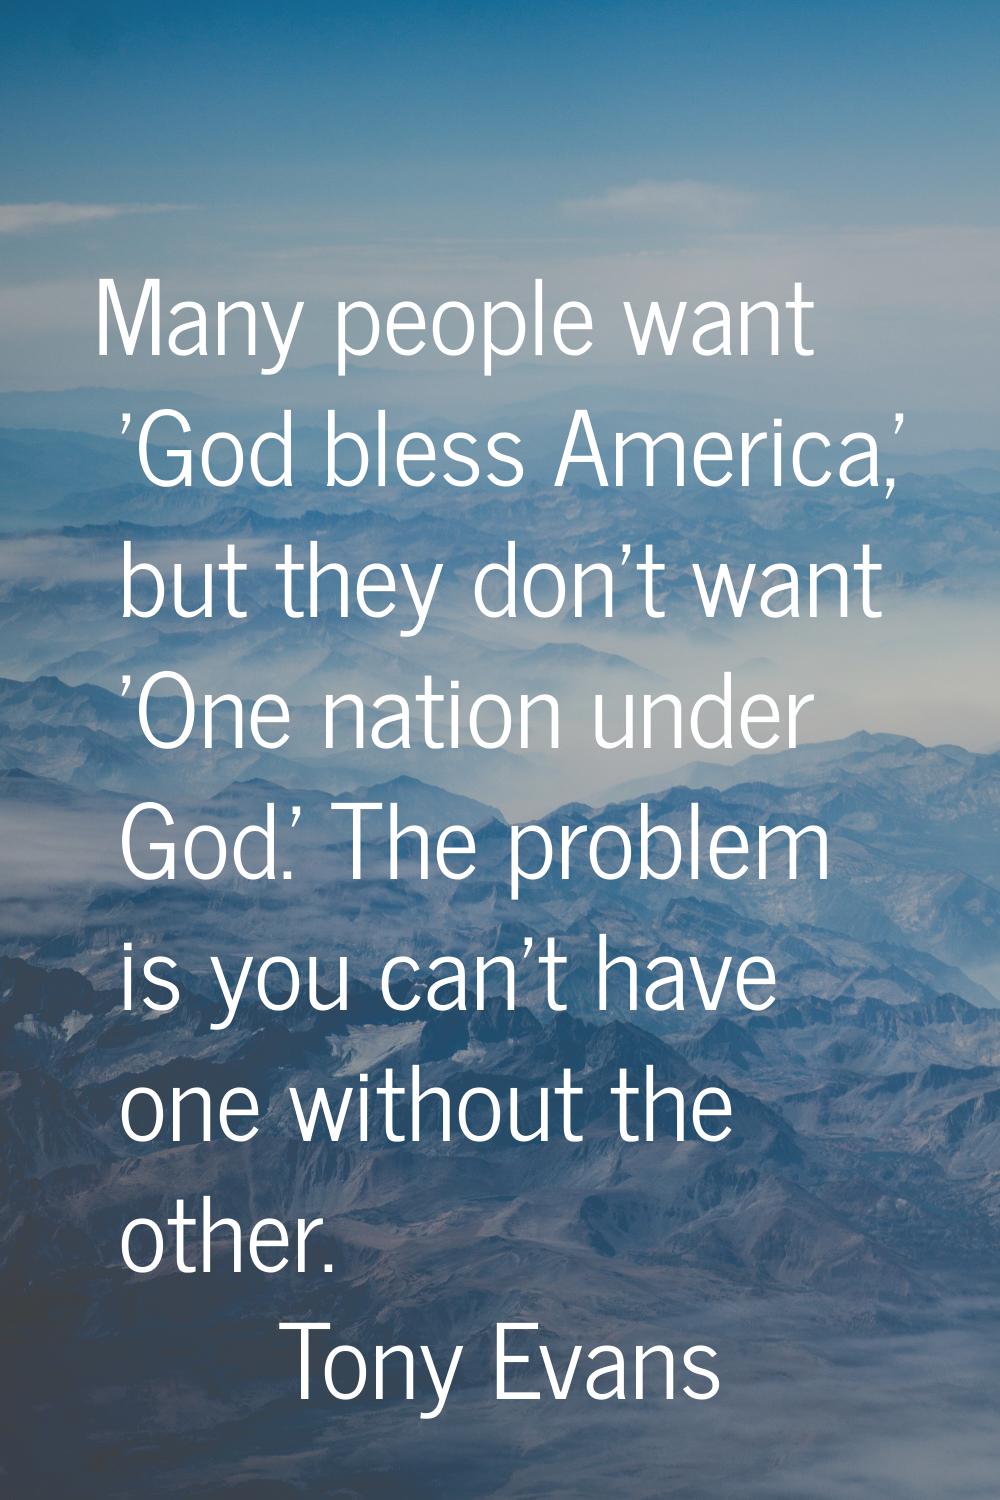 Many people want 'God bless America,' but they don't want 'One nation under God.' The problem is yo